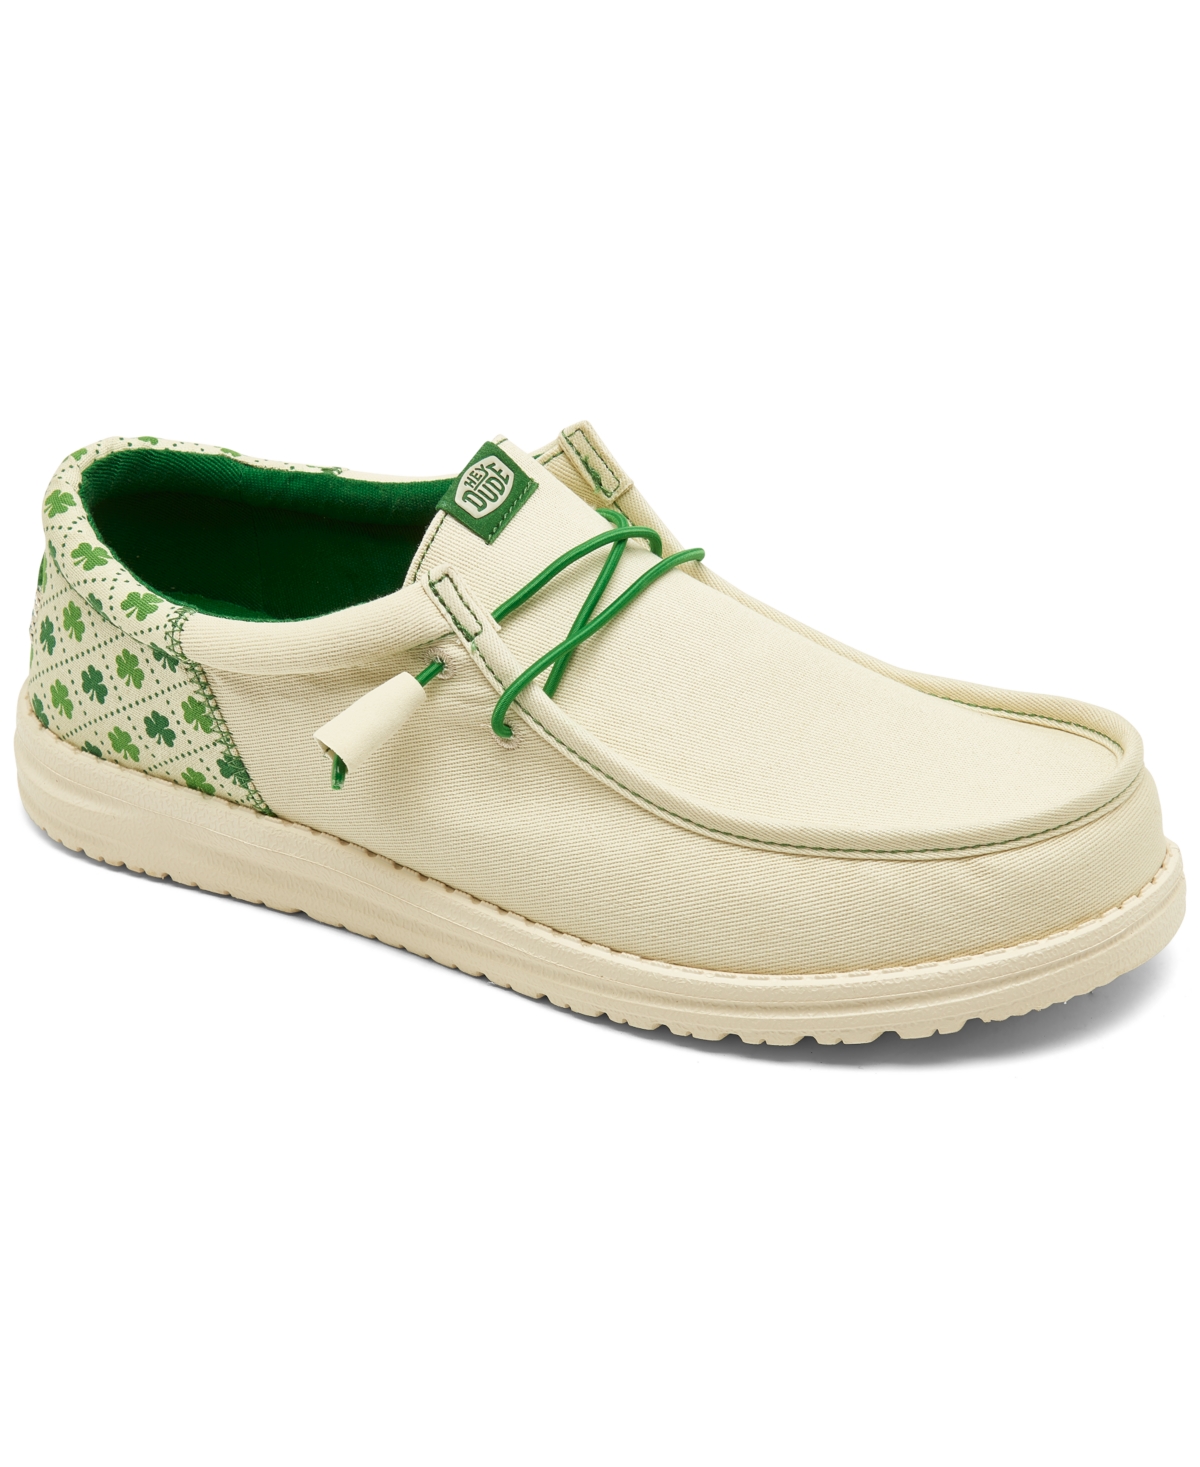 Men's Wally Funk Luck Slip-On Casual Sneakers from Finish Line - White, Shamrock